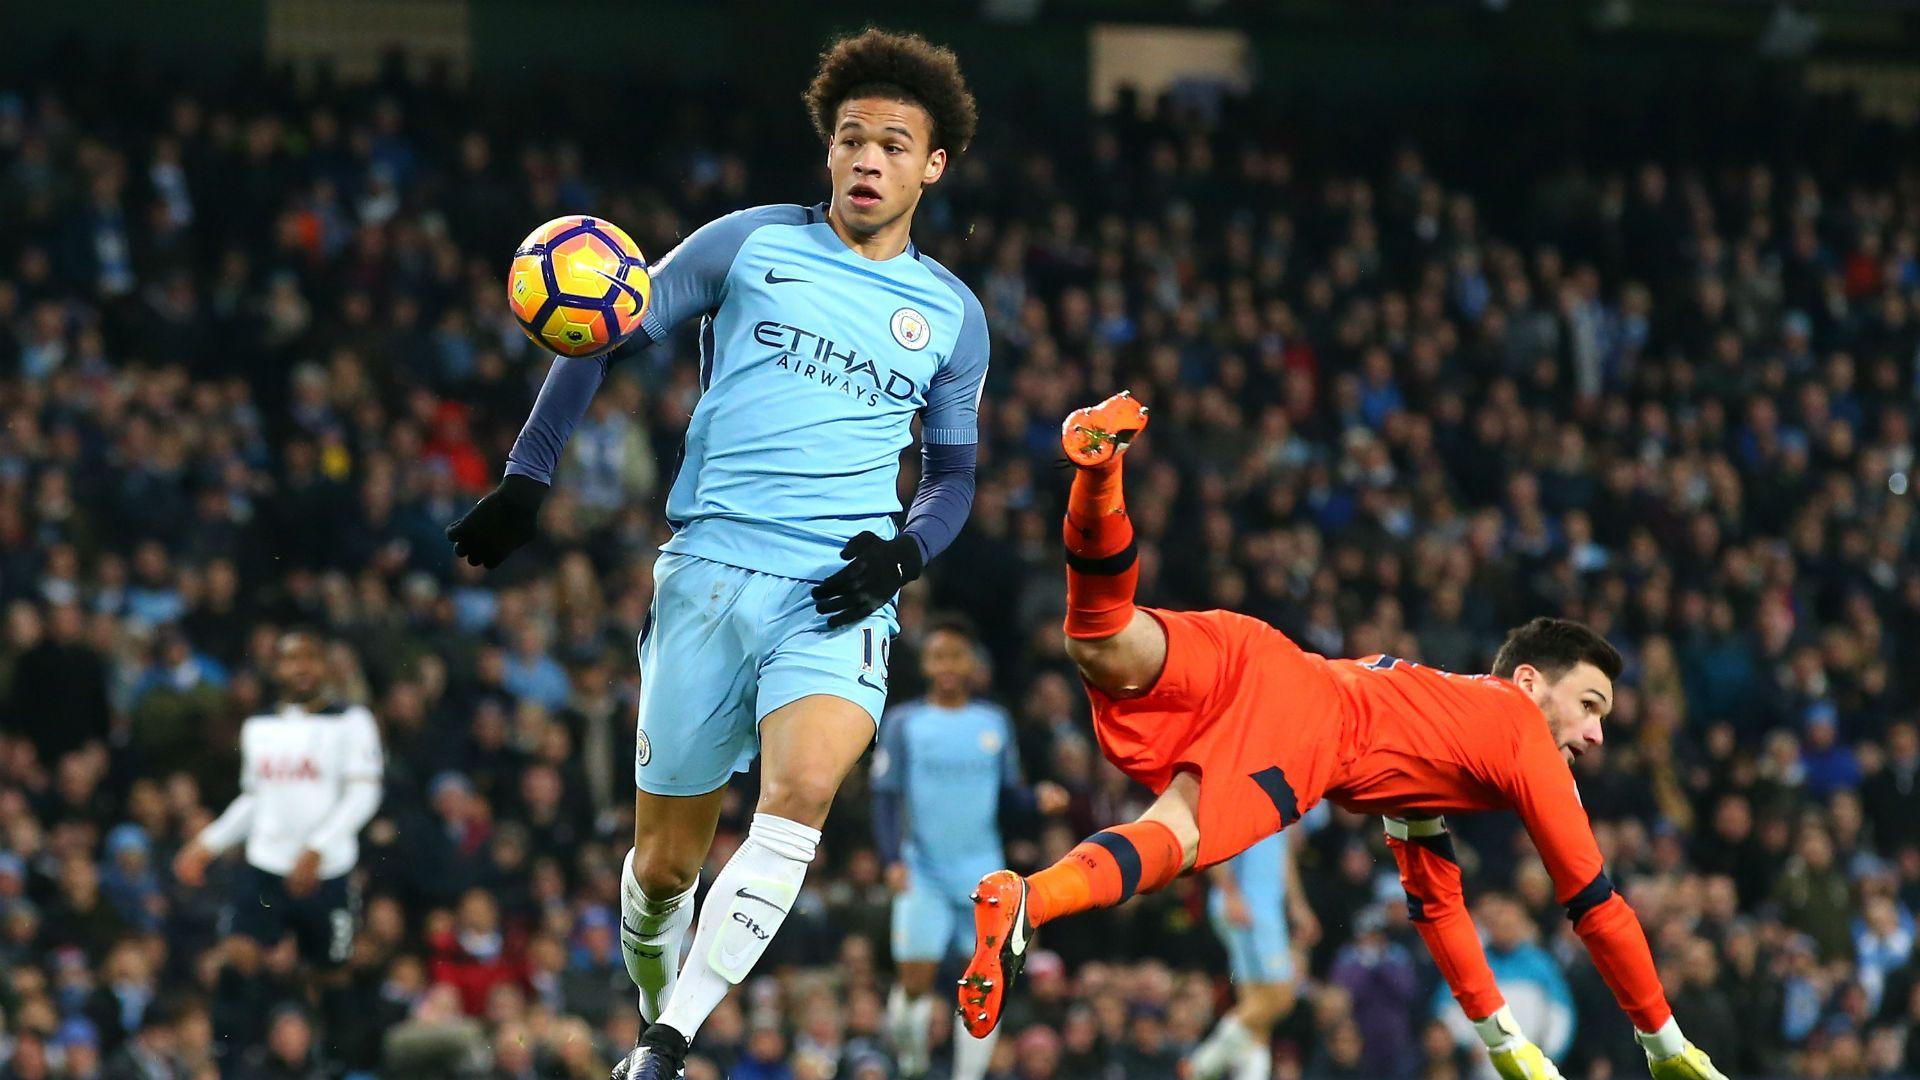 Leroy Sane can be a star for Man City & Germany'